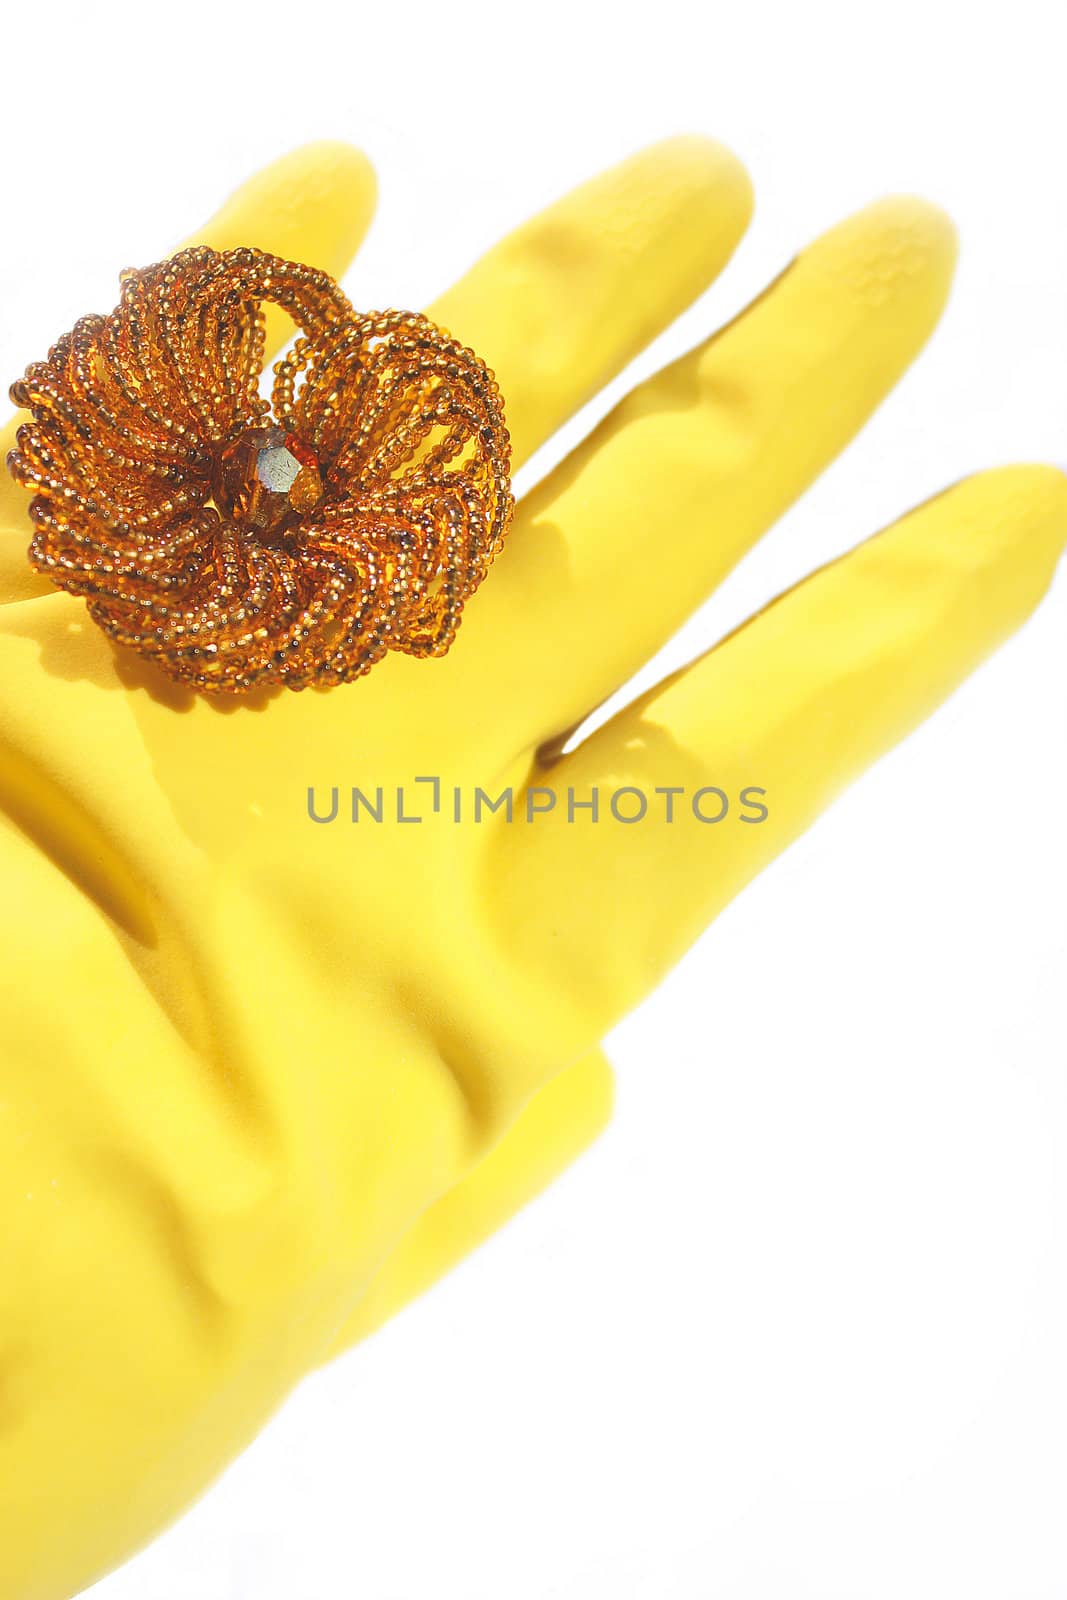 decoration on the glove, yellow gloves, household gloves, best gloves